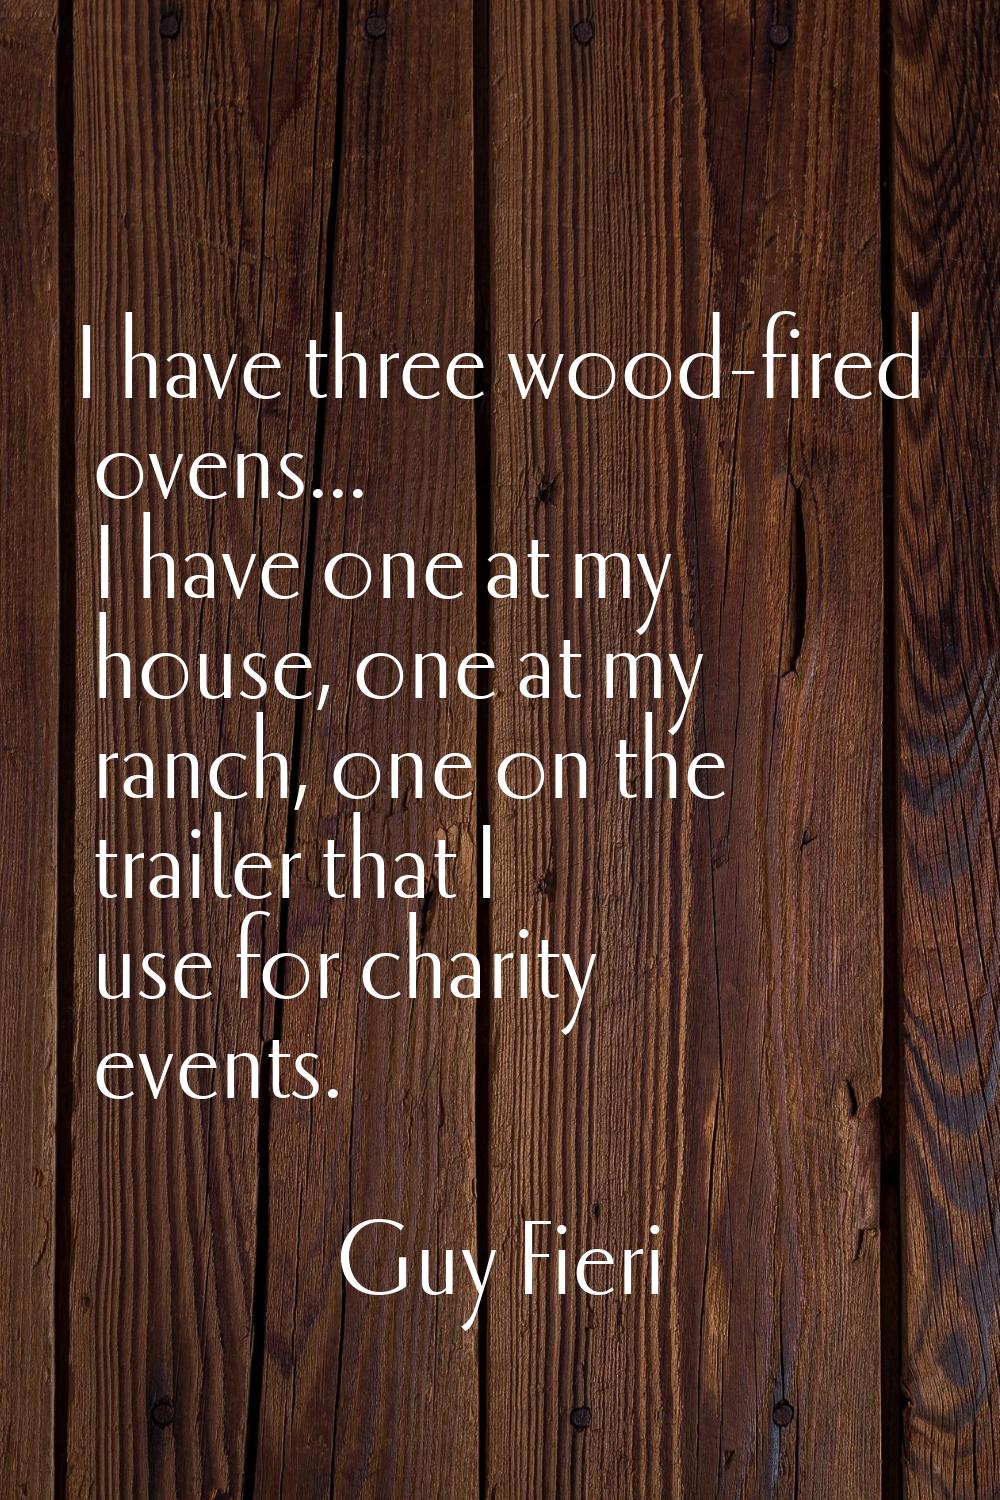 I have three wood-fired ovens... I have one at my house, one at my ranch, one on the trailer that I